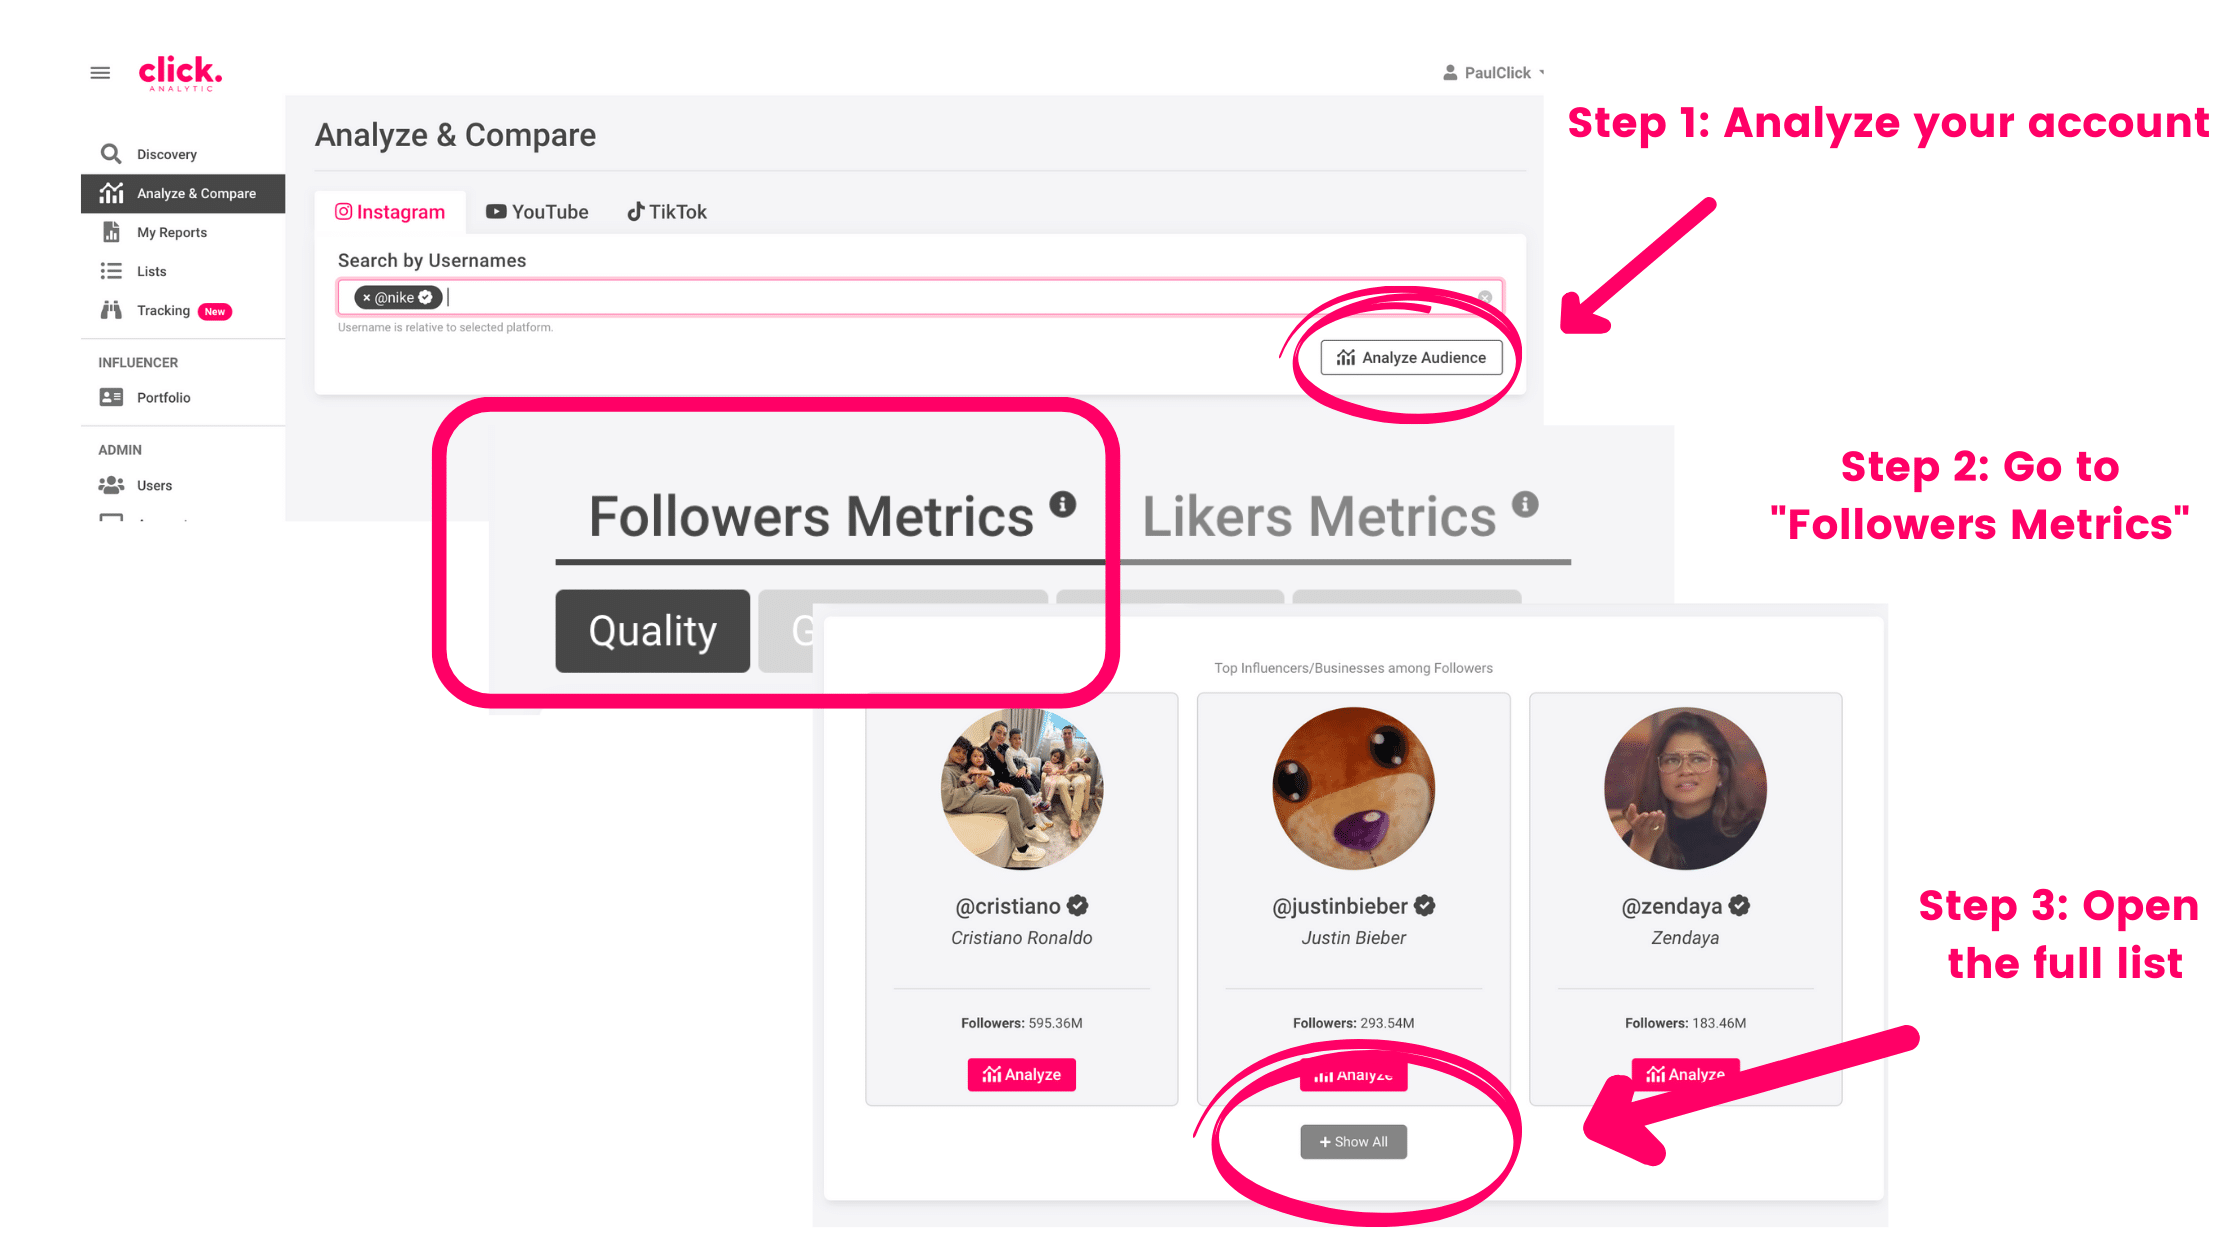 How to find influencers among followers on Click Analytic.